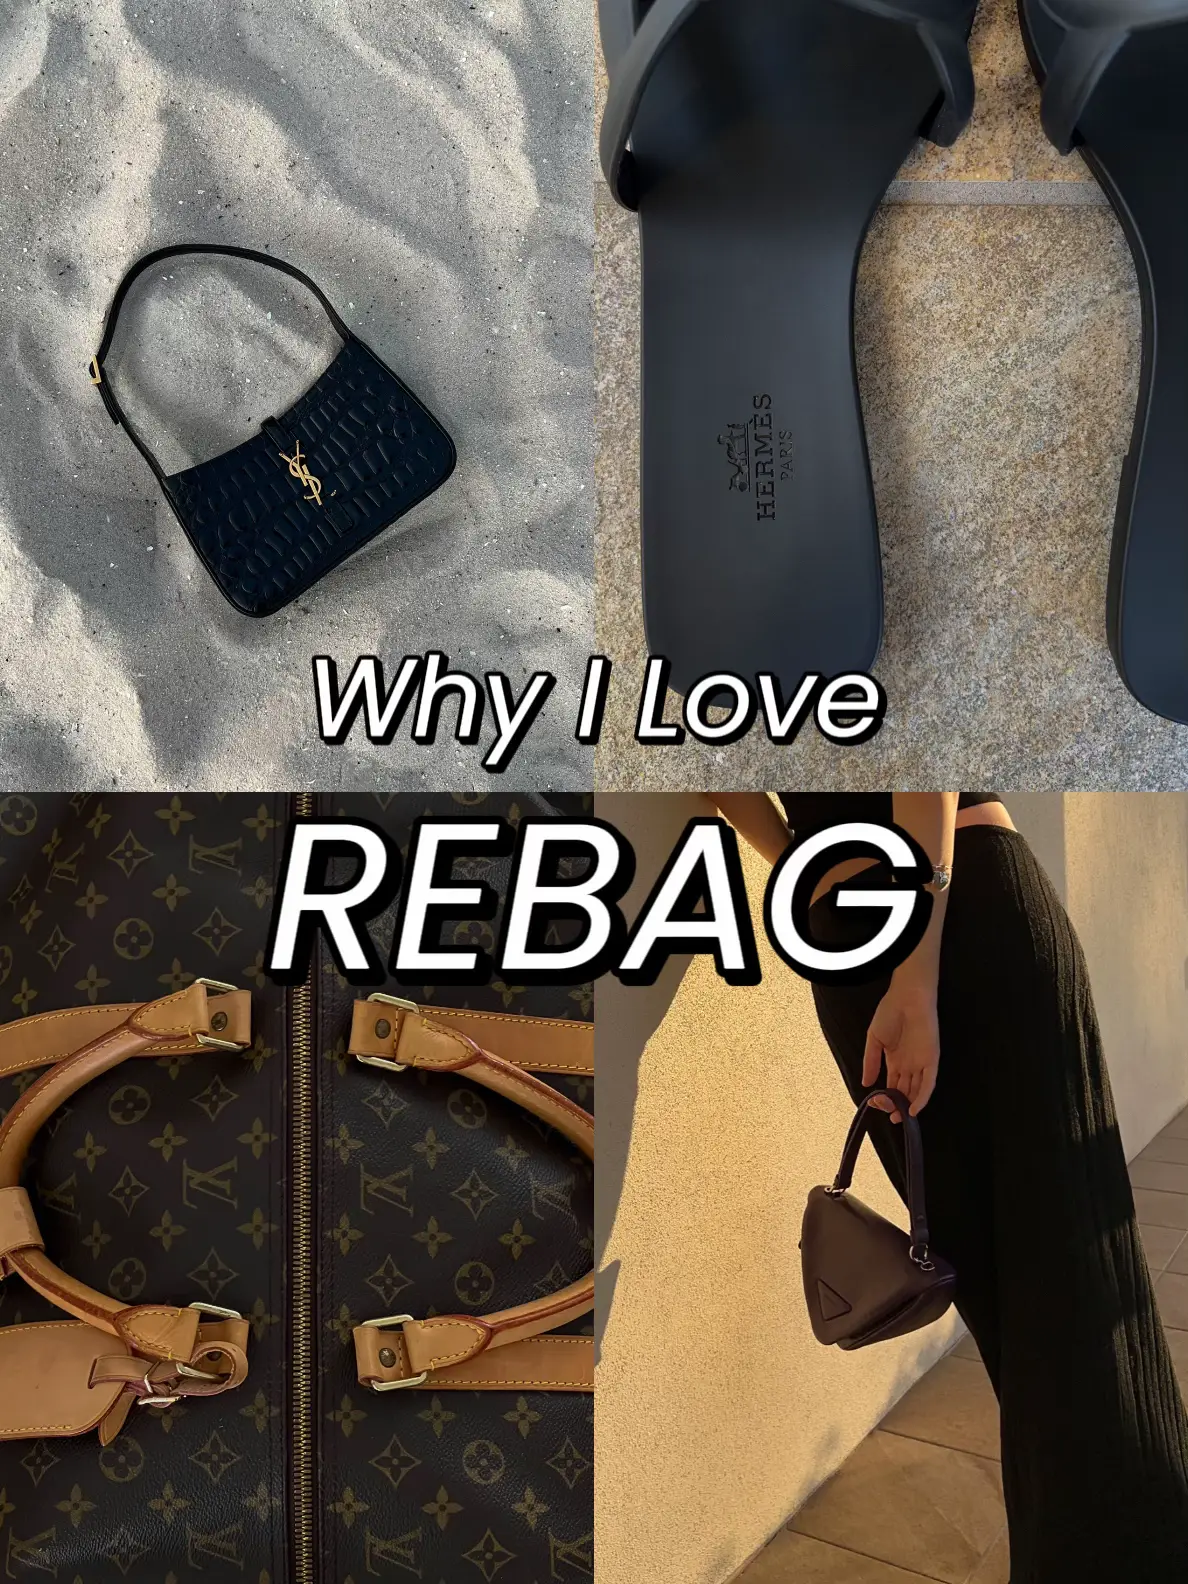 Why I Love REBAG, Gallery posted by Angelica